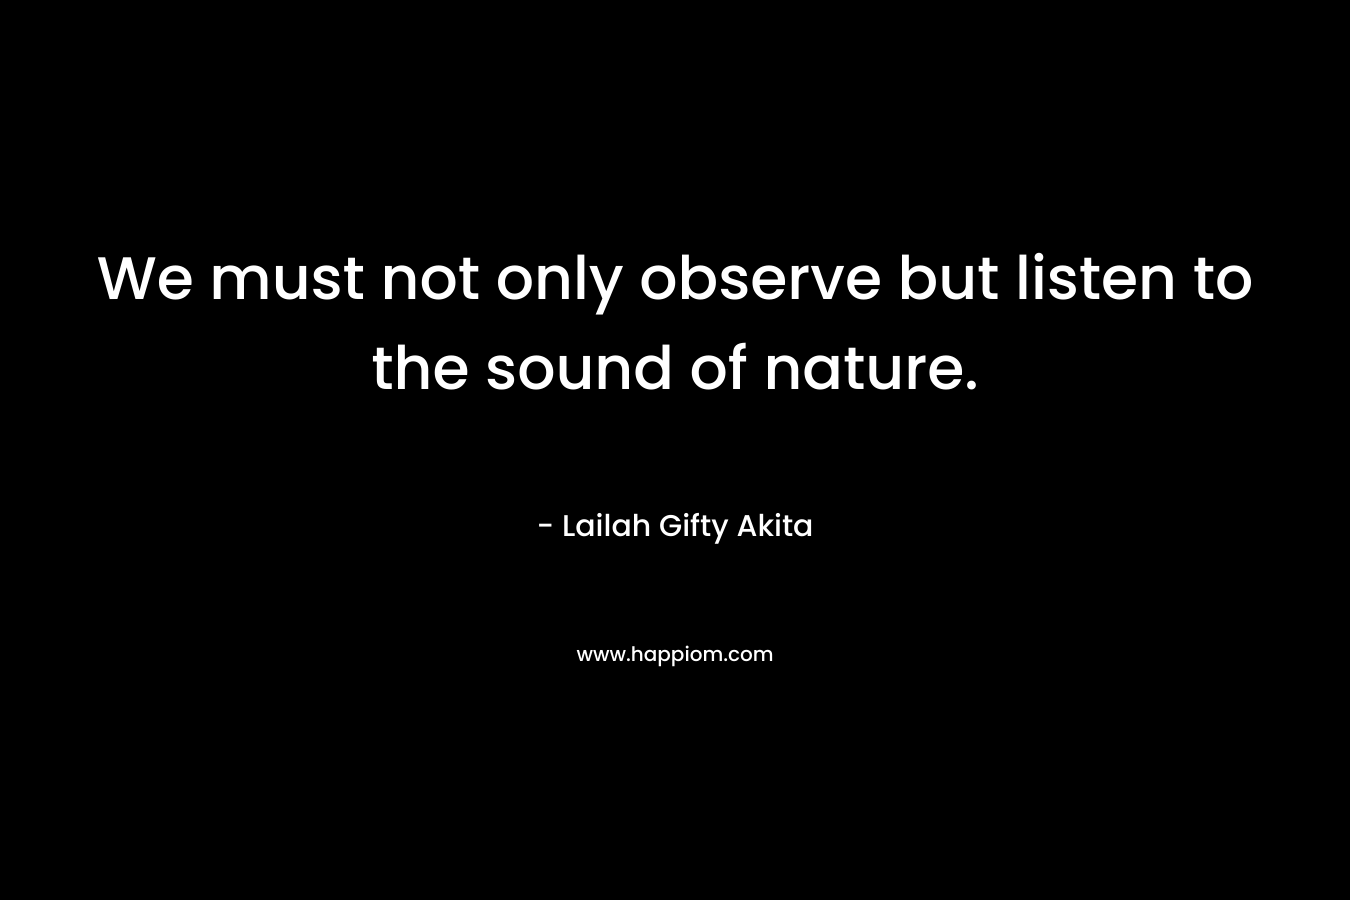 We must not only observe but listen to the sound of nature.